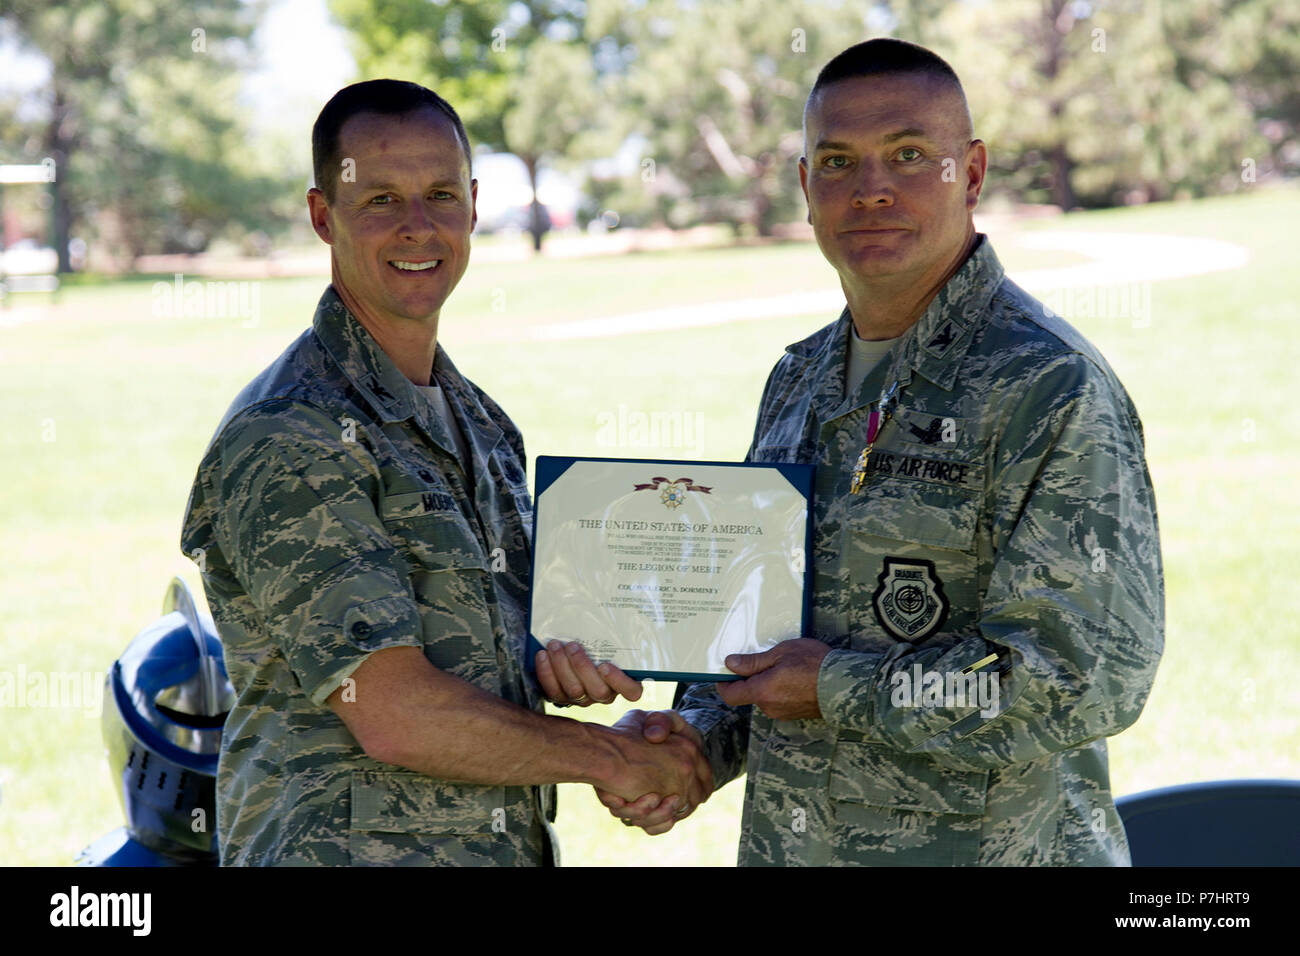 PETERSON AIR FORCE BASE, Colo. – Col. Todd Moore, 21st Space Wing commander, presents the Legion of Merit to Col. Eric Dorminey, 21st Space Wing outgoing vice commander, at a going away barbecue at Capt. Lyon Memorial Park at Peterson Air Force Base, Colorado, July 2, 2018. Dorminey became 21 SW vice commander in April, 2015, and spent nearly 39 months in the position. (U.S. Air Force photo by Robb Lingley) Stock Photo